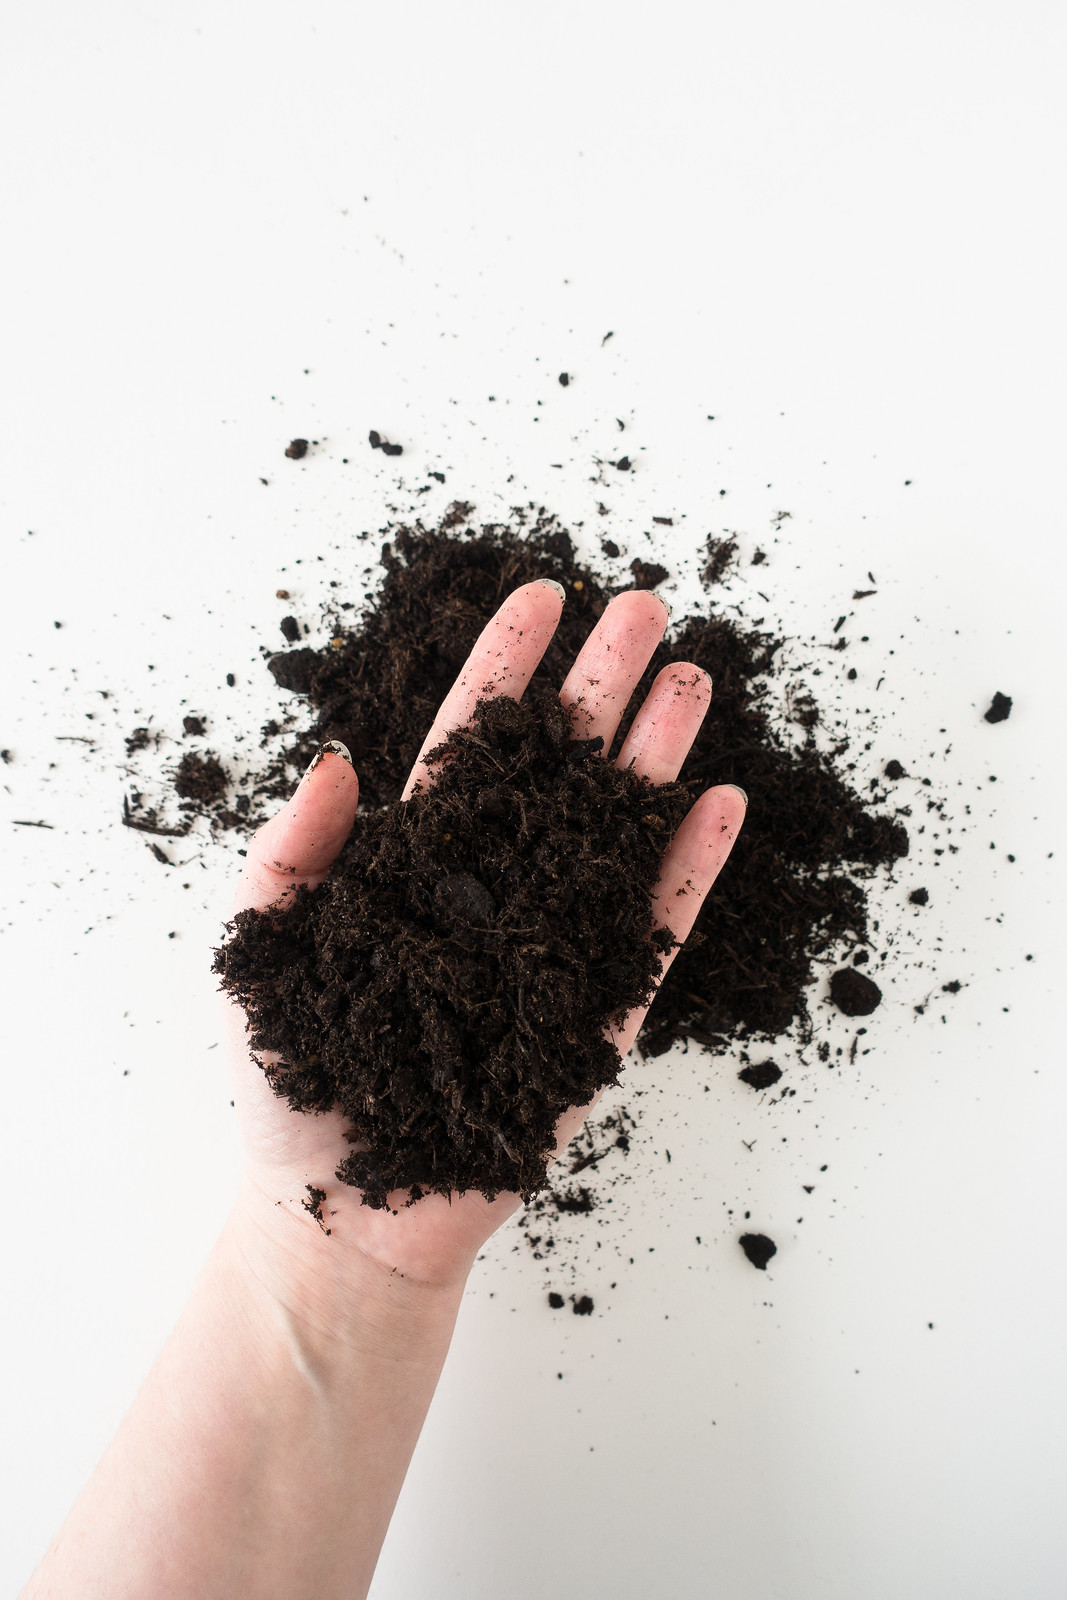 Composting In An Apartment